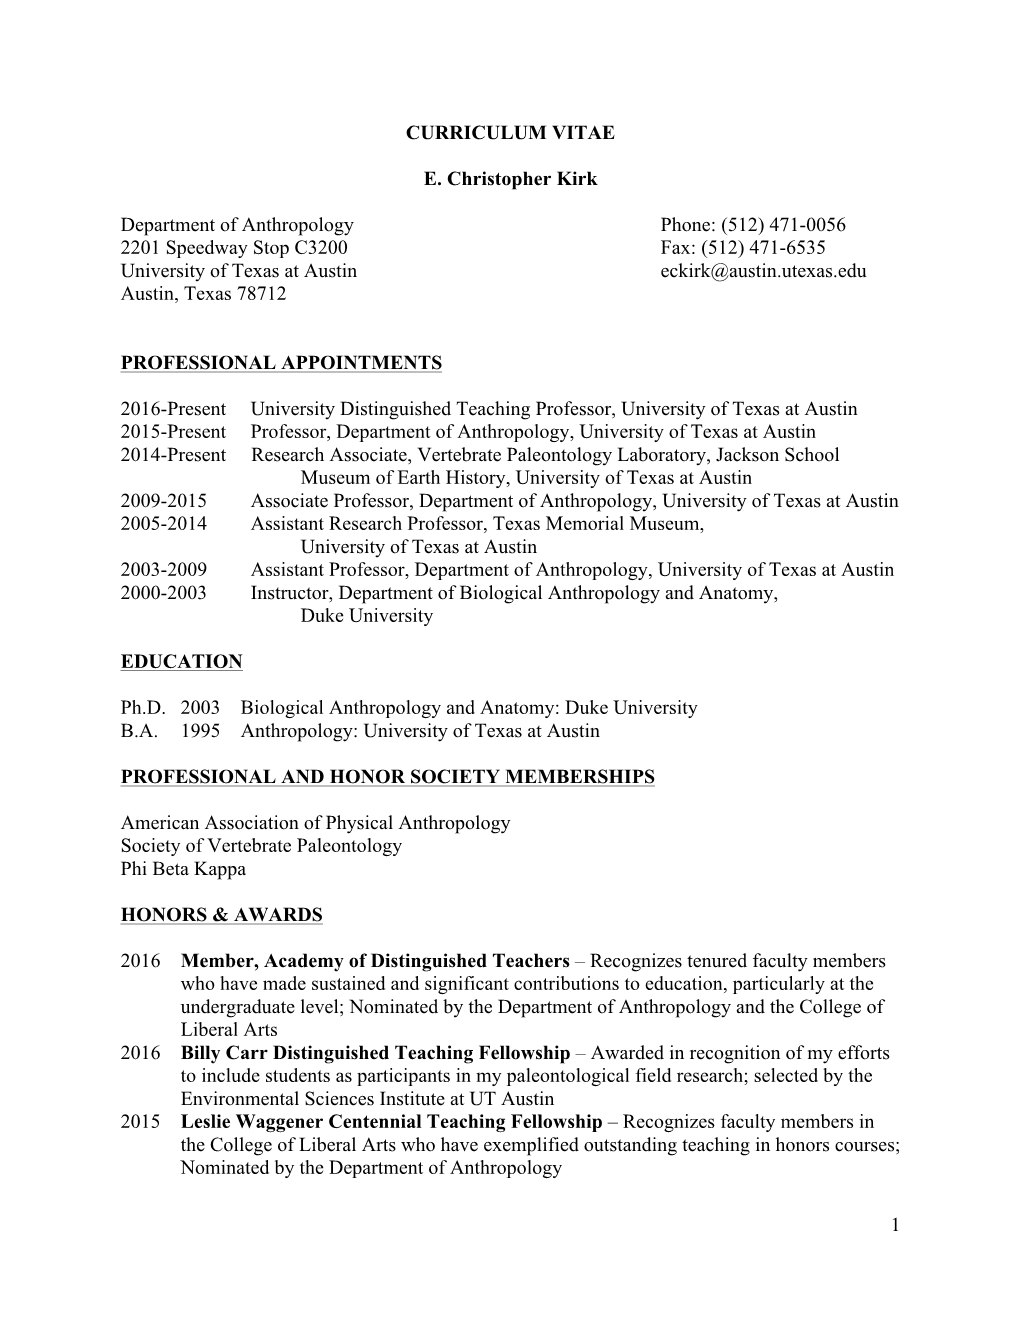 1 CURRICULUM VITAE E. Christopher Kirk Department of Anthropology Phone: (512) 471-0056 2201 Speedway Stop C3200 Fax: (512) 47